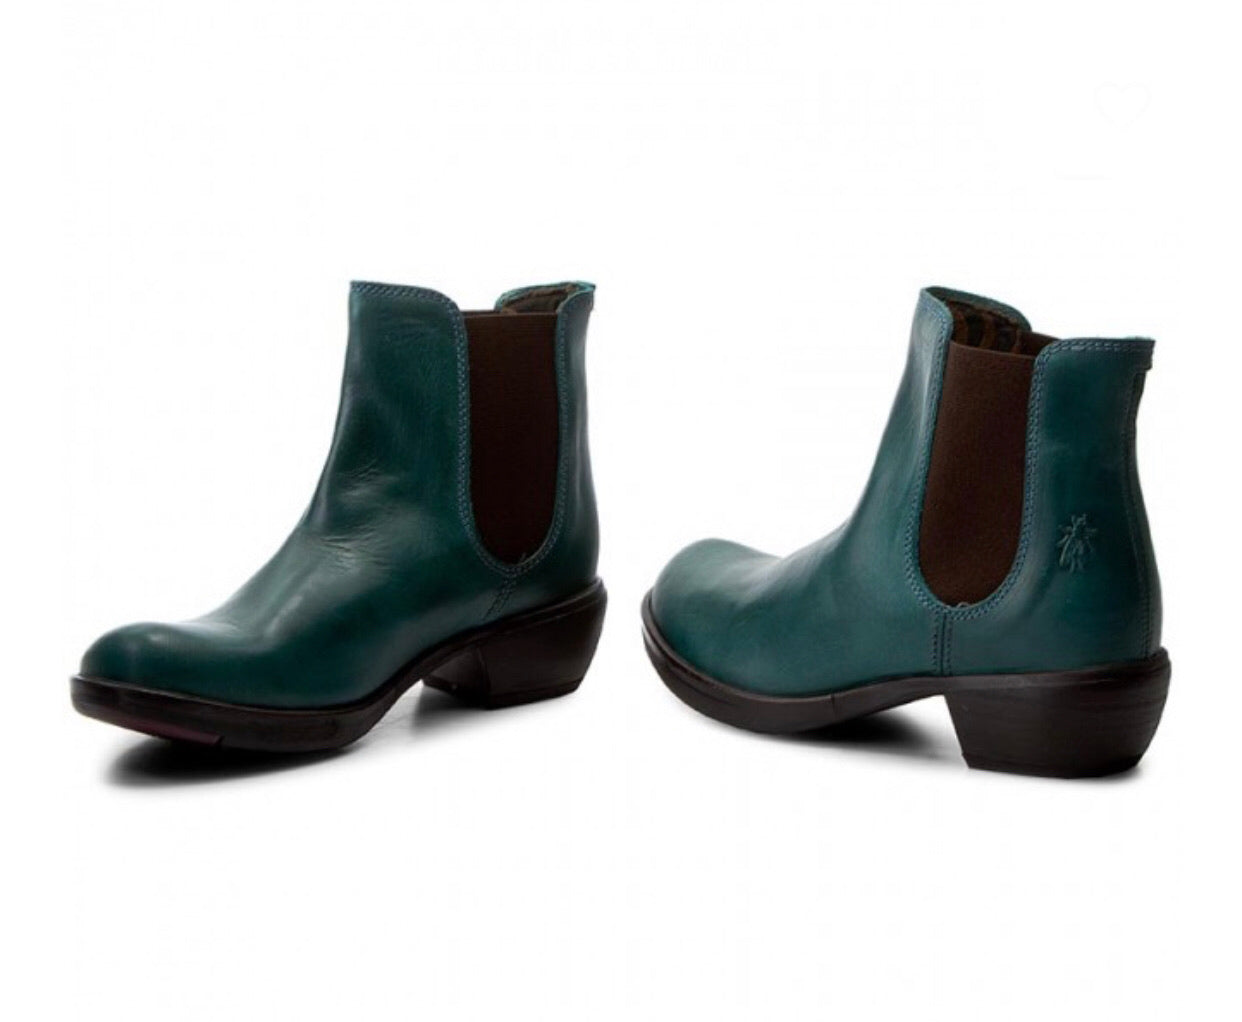 Fly London Make Petrol Ankle Chelsea Boots Made In Portugal